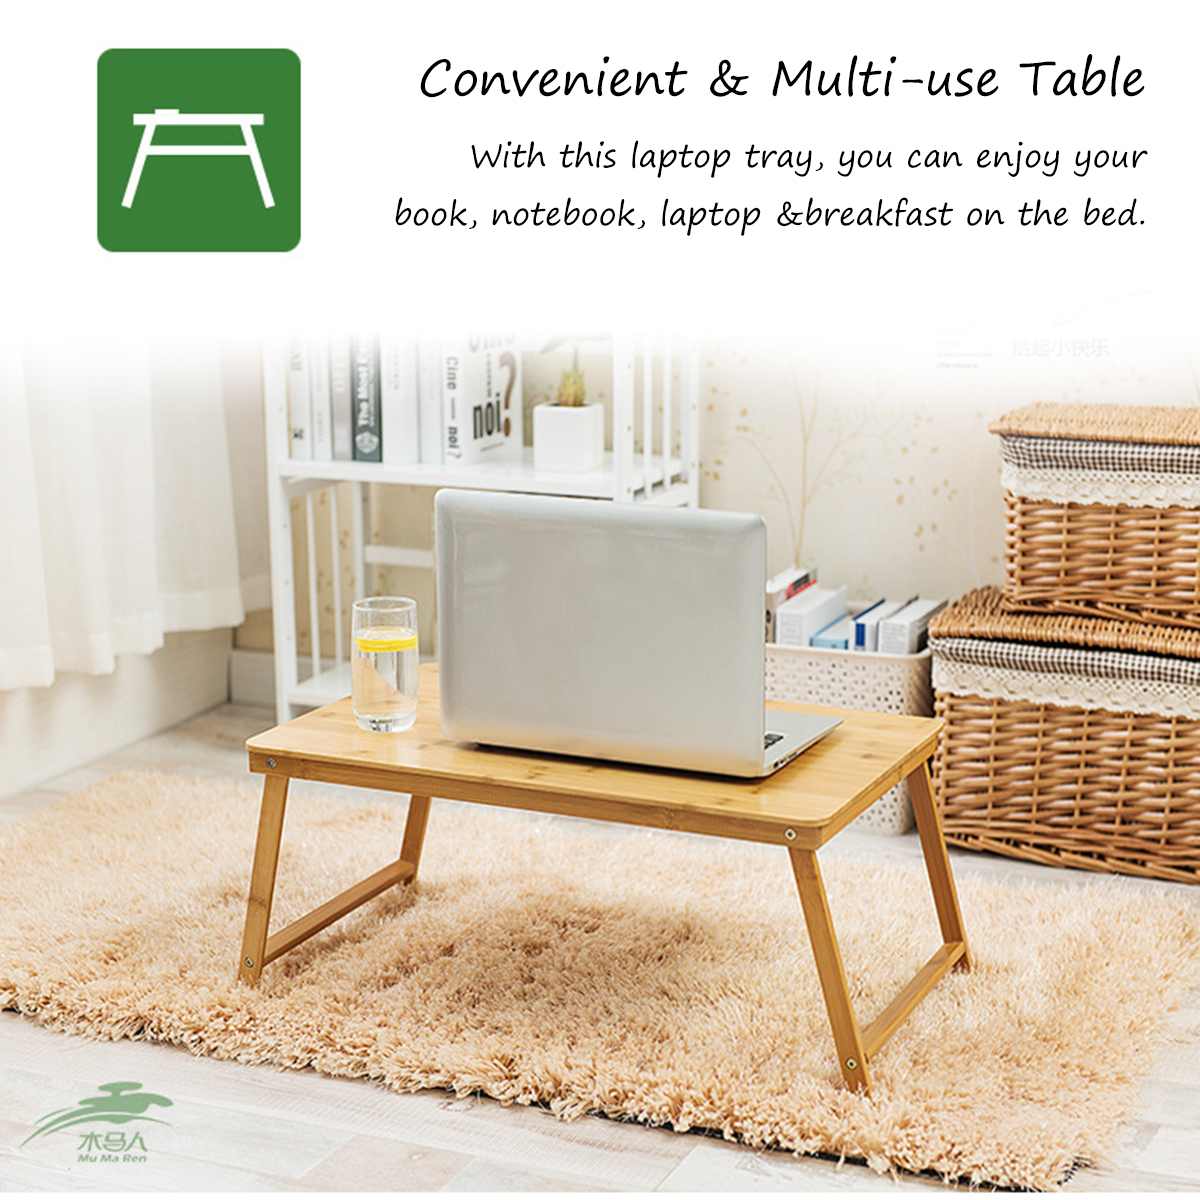 New Bamboo Material Foldable Laptop Notebook Lap PC Folding Desk Computer Desk Portable Table Vented Stand Bed Tray